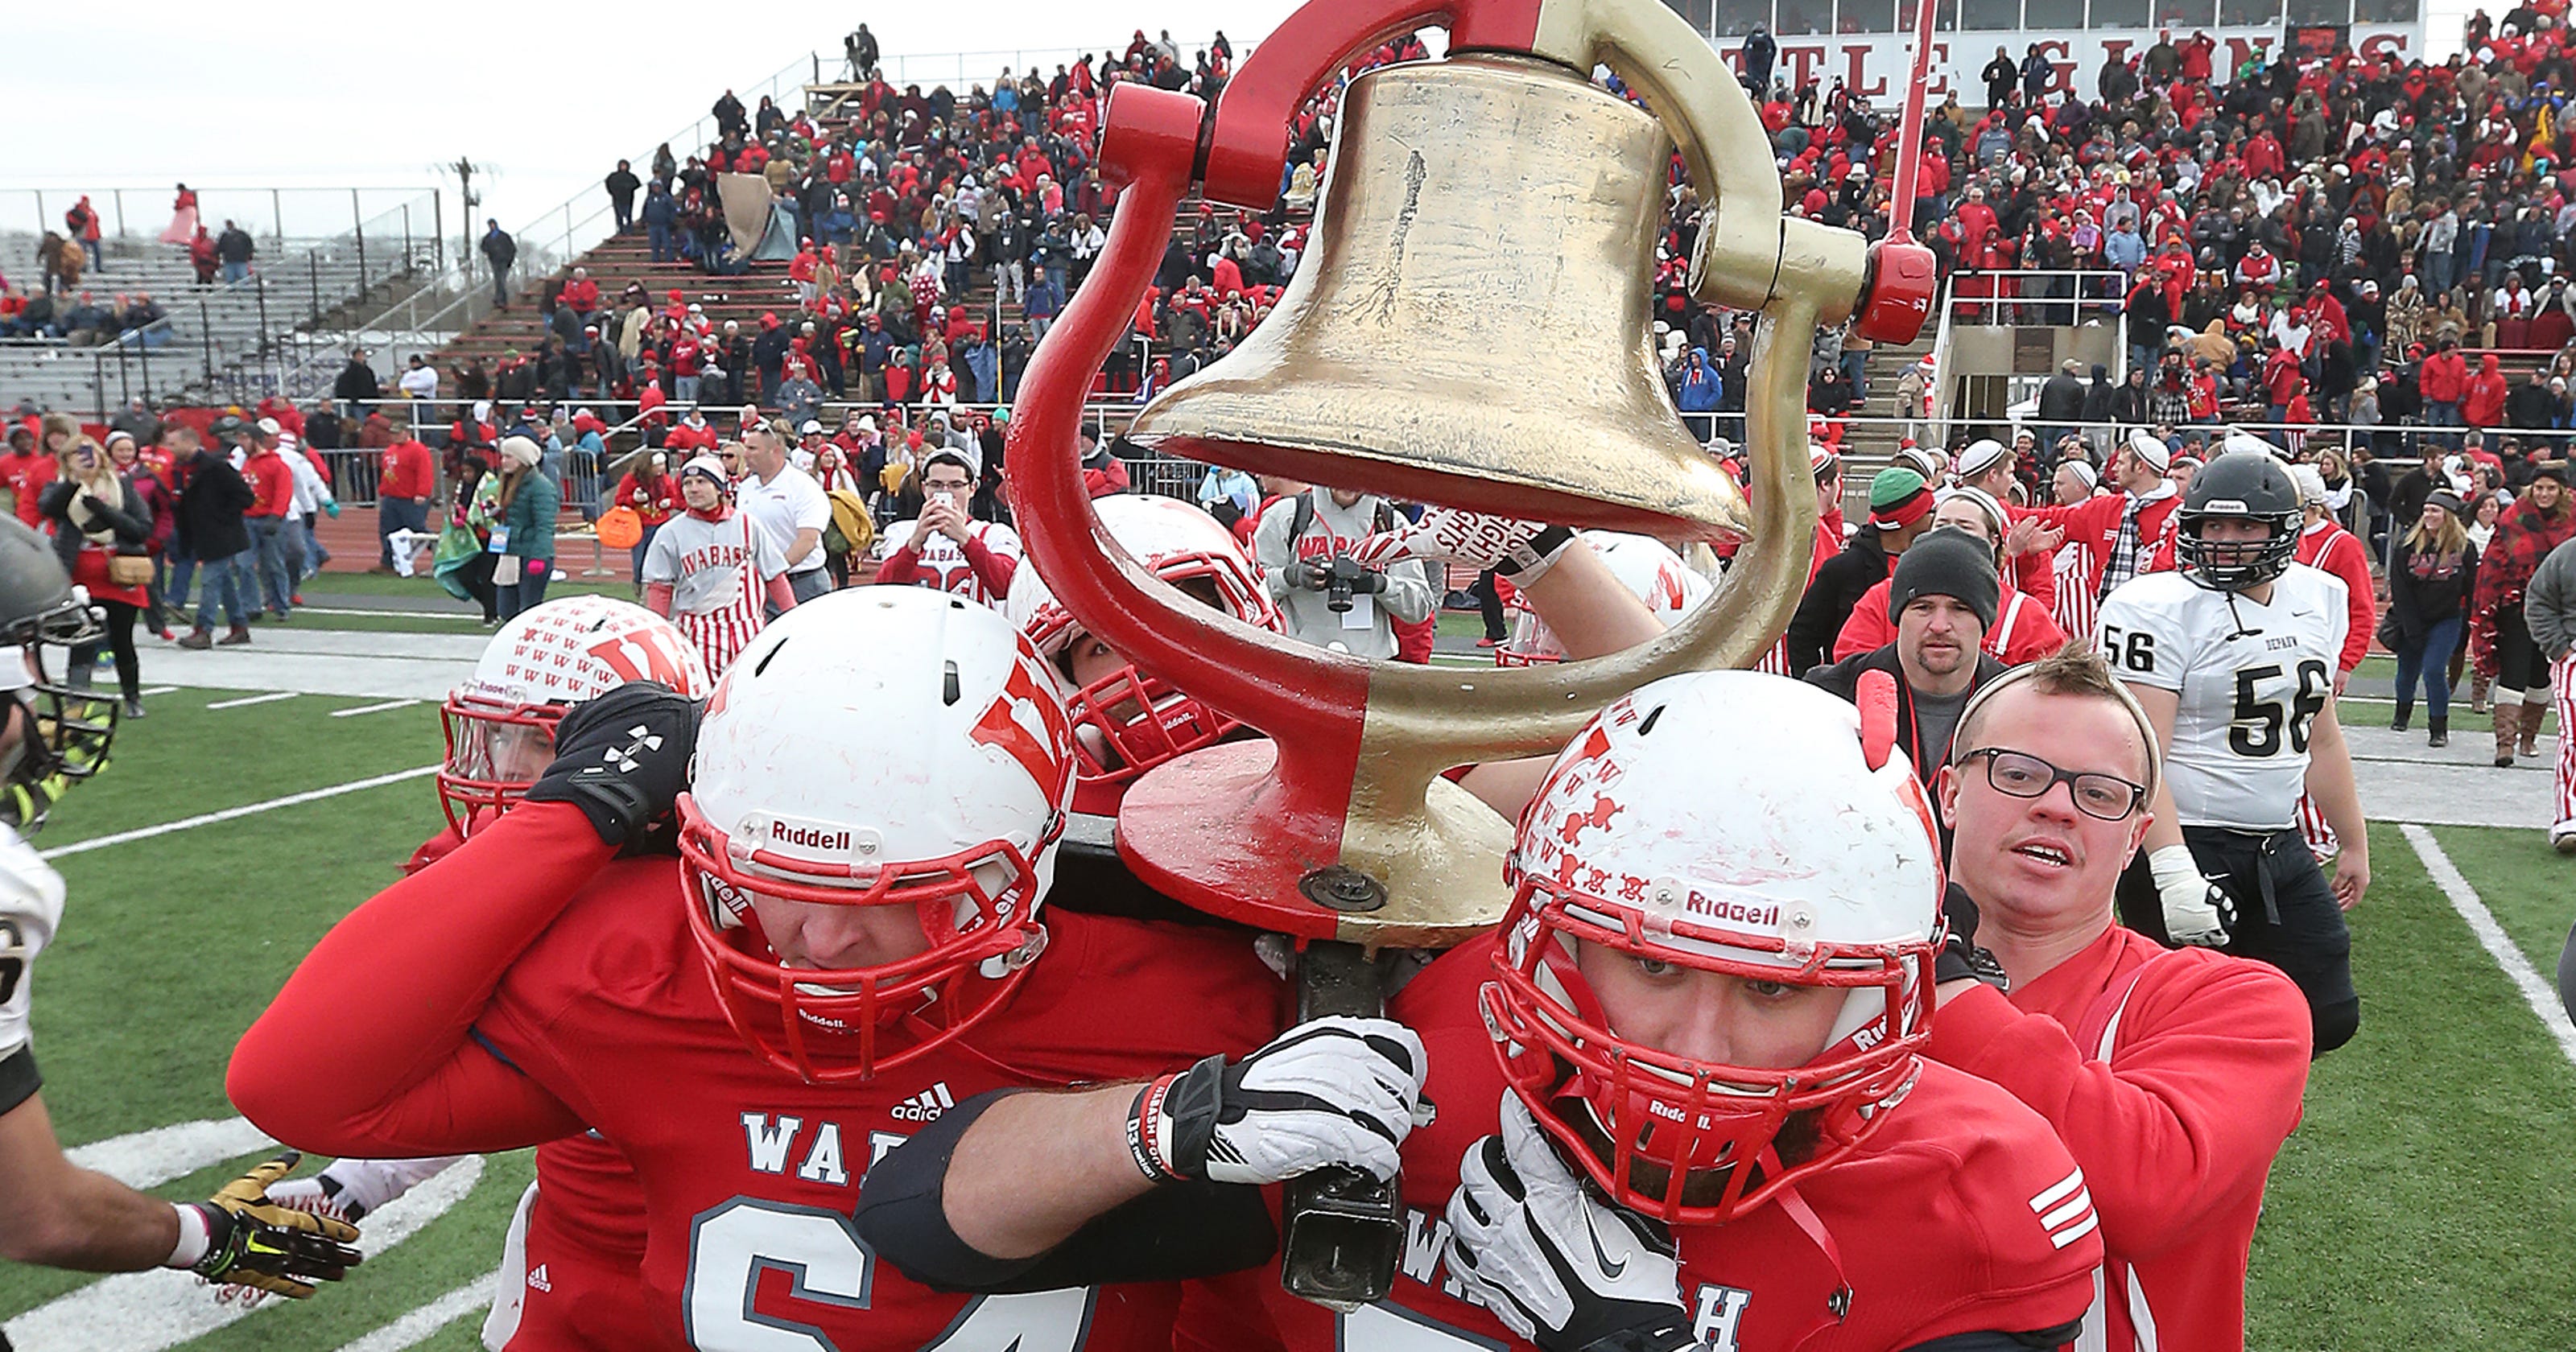 Monon Bell Wabash, DePauw to meet for 122nd time in football